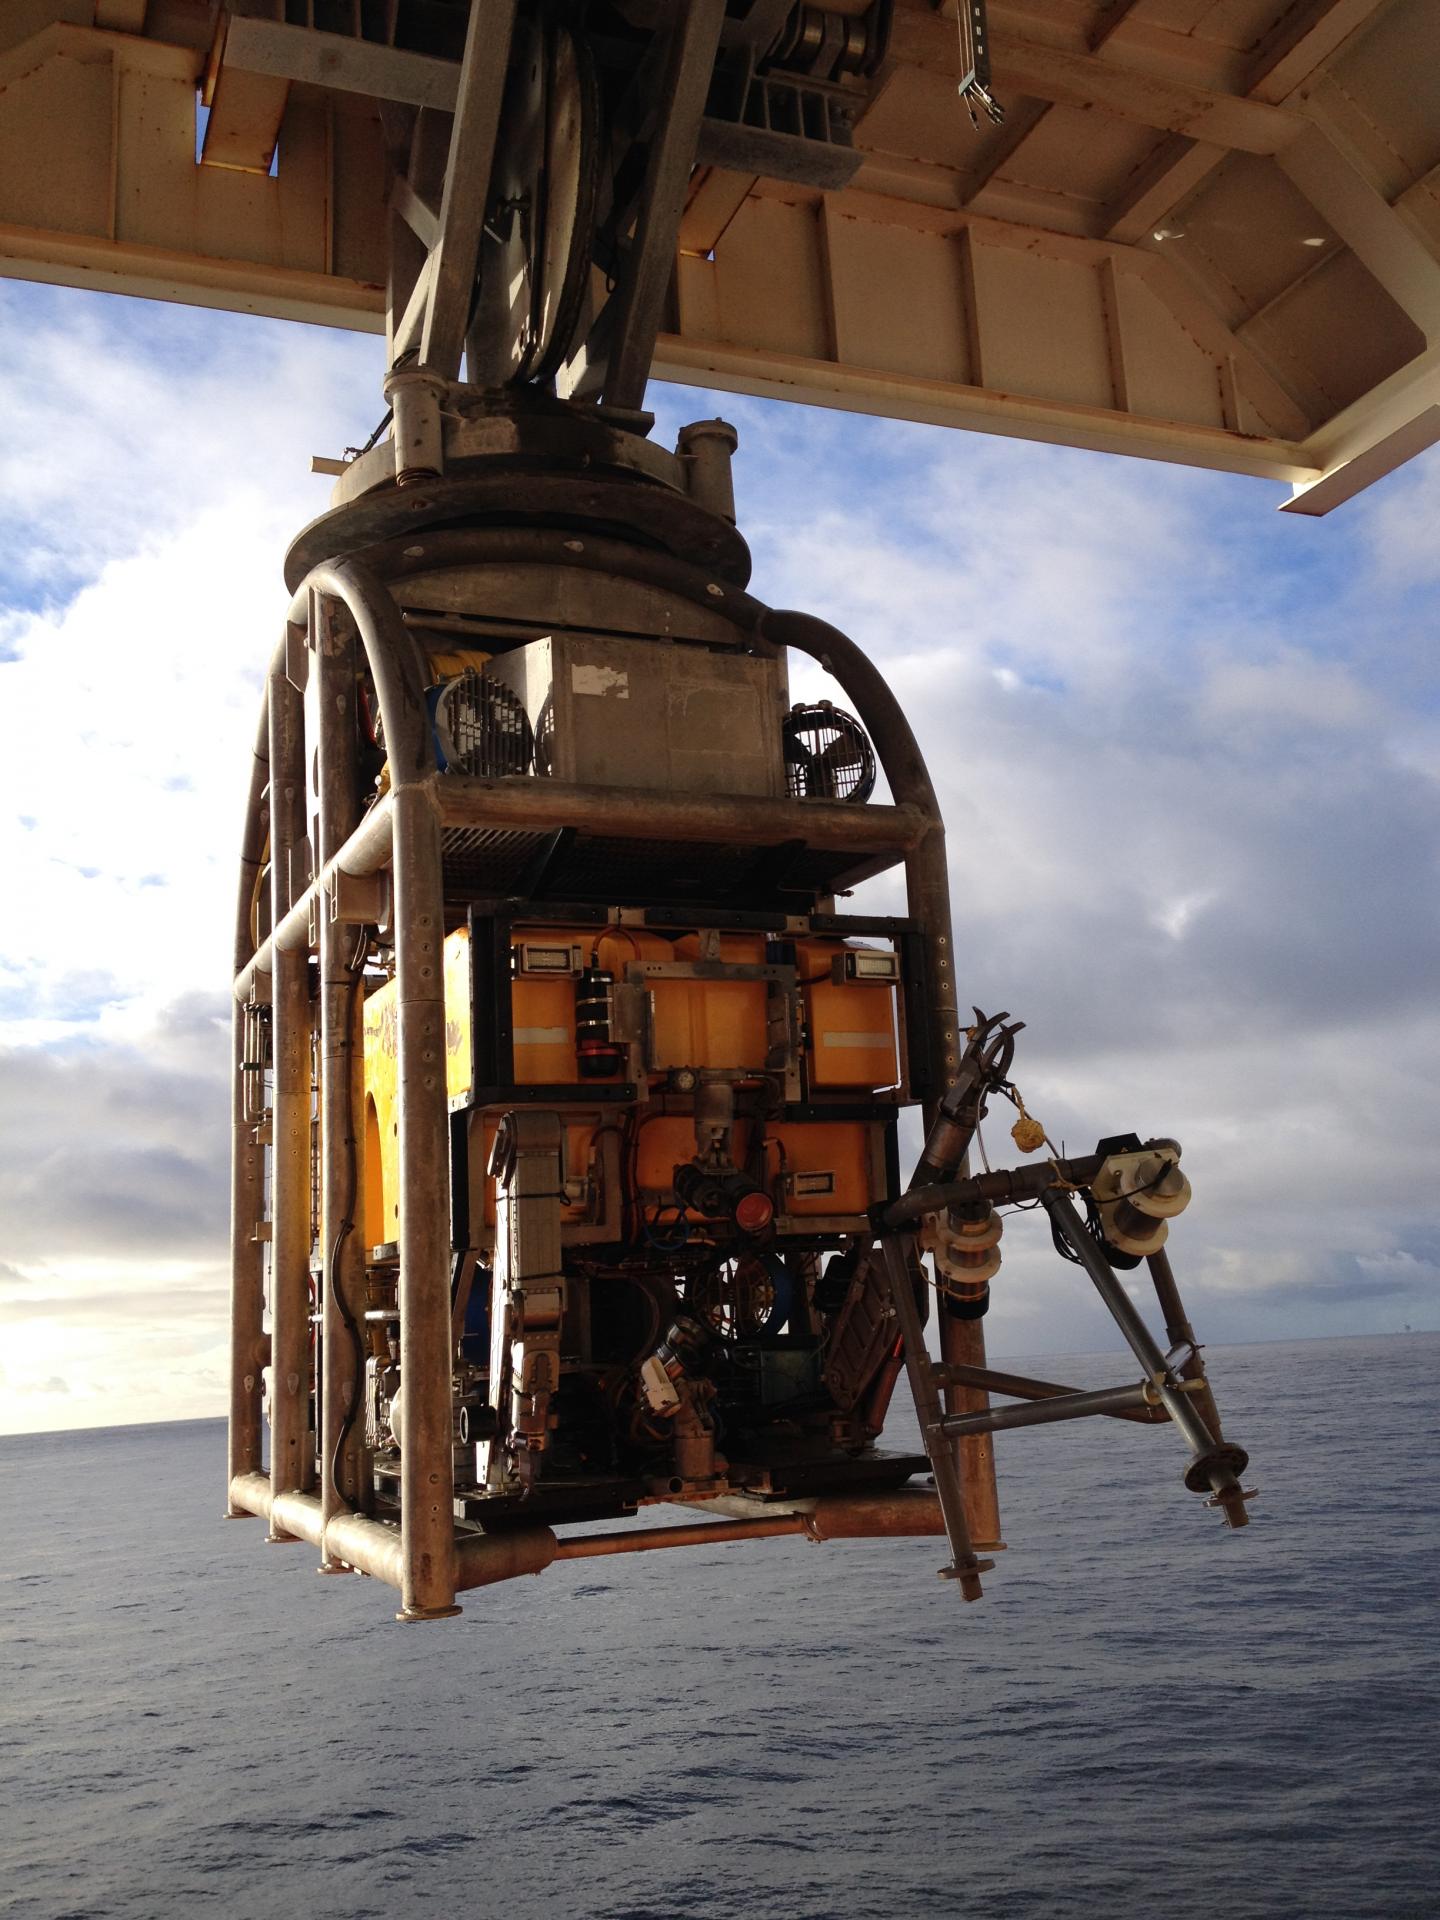 An Oceaneering Magnum ROV holding a time-lapse camera system